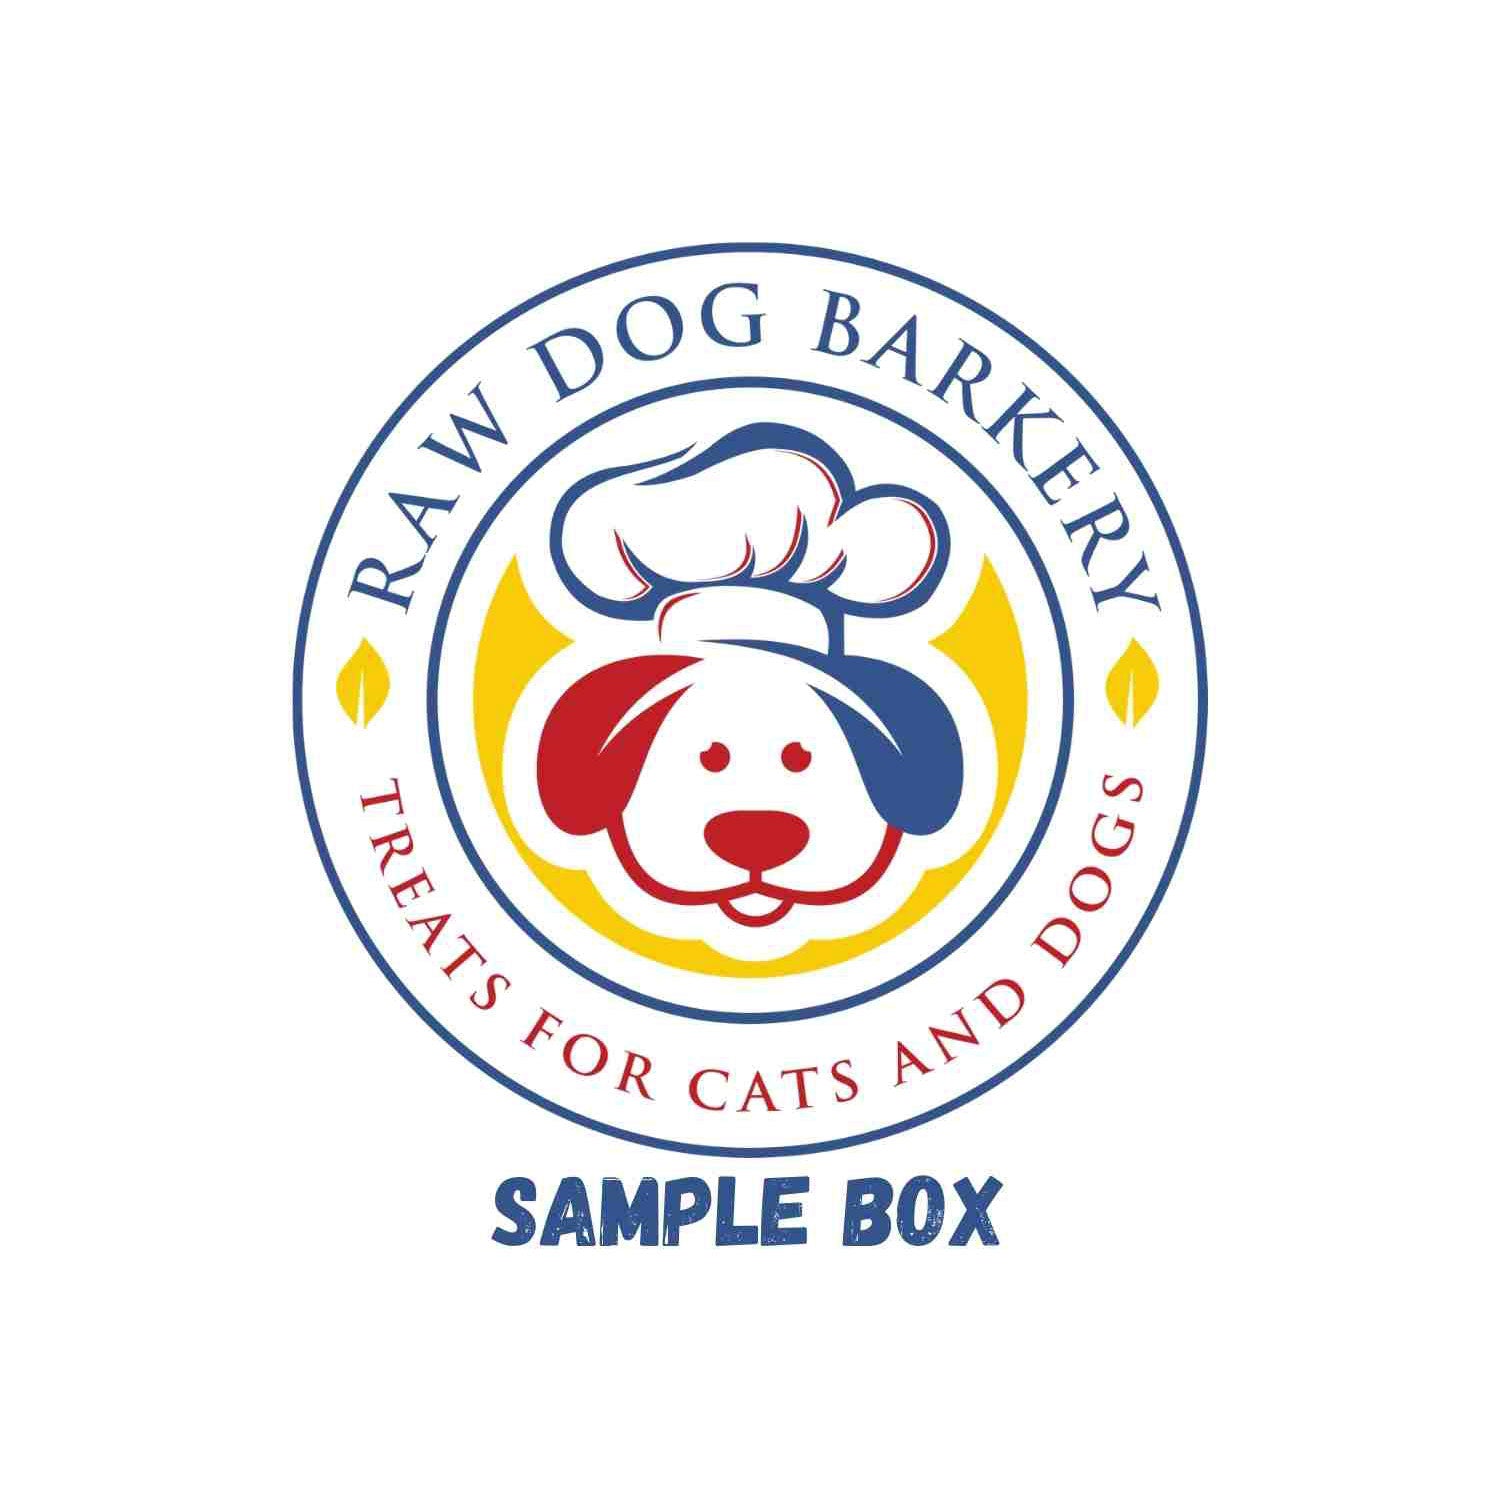 Raw Dog Barkery Sample Box For Cats & Dogs